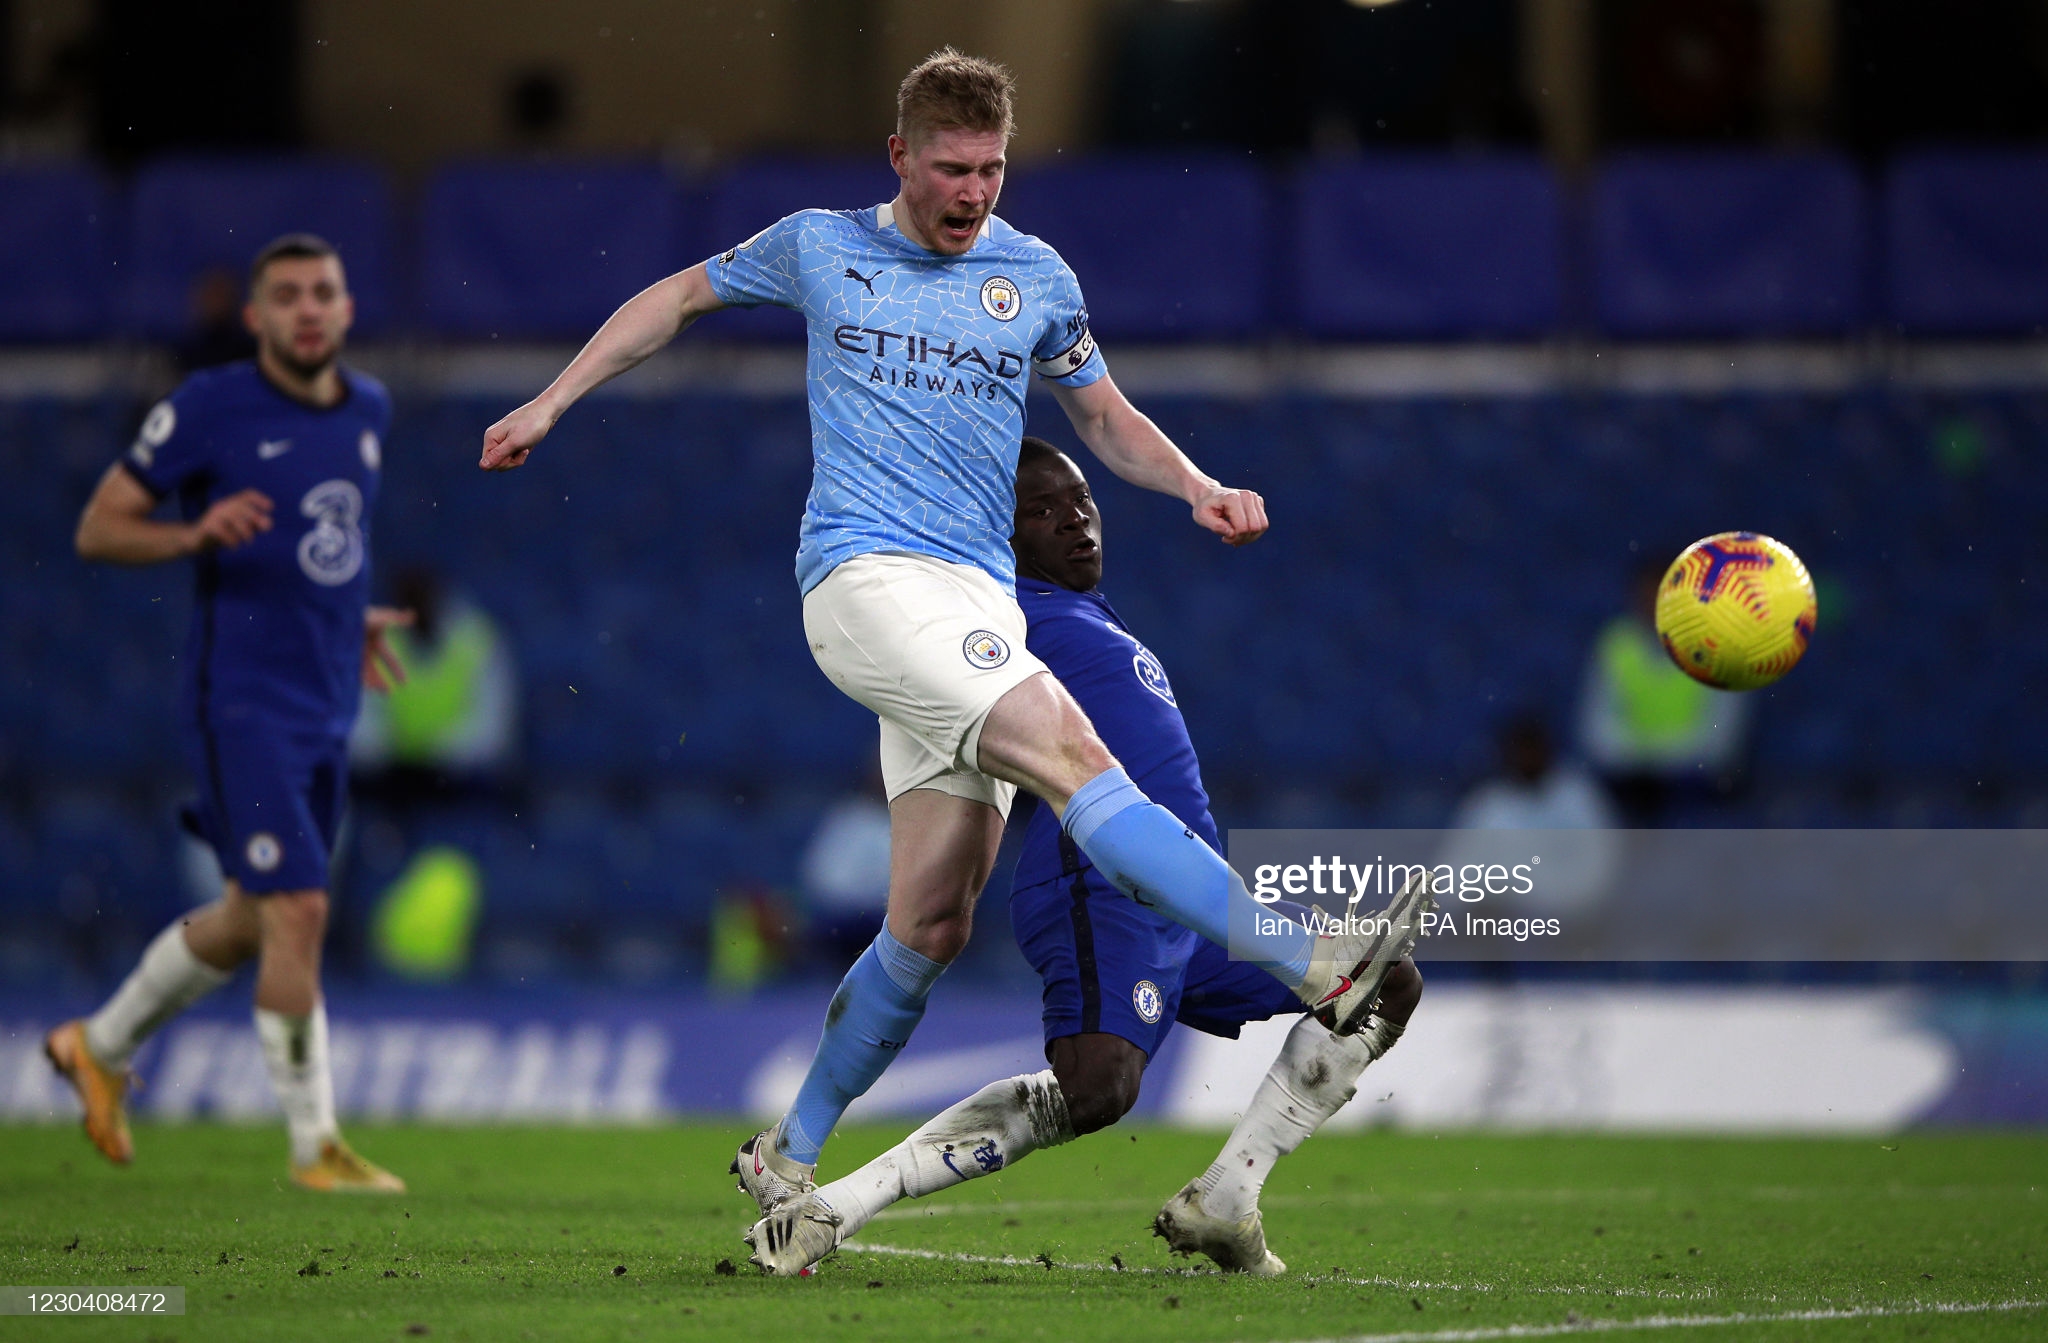 Kevin De Bruyne and N'Golo Kante